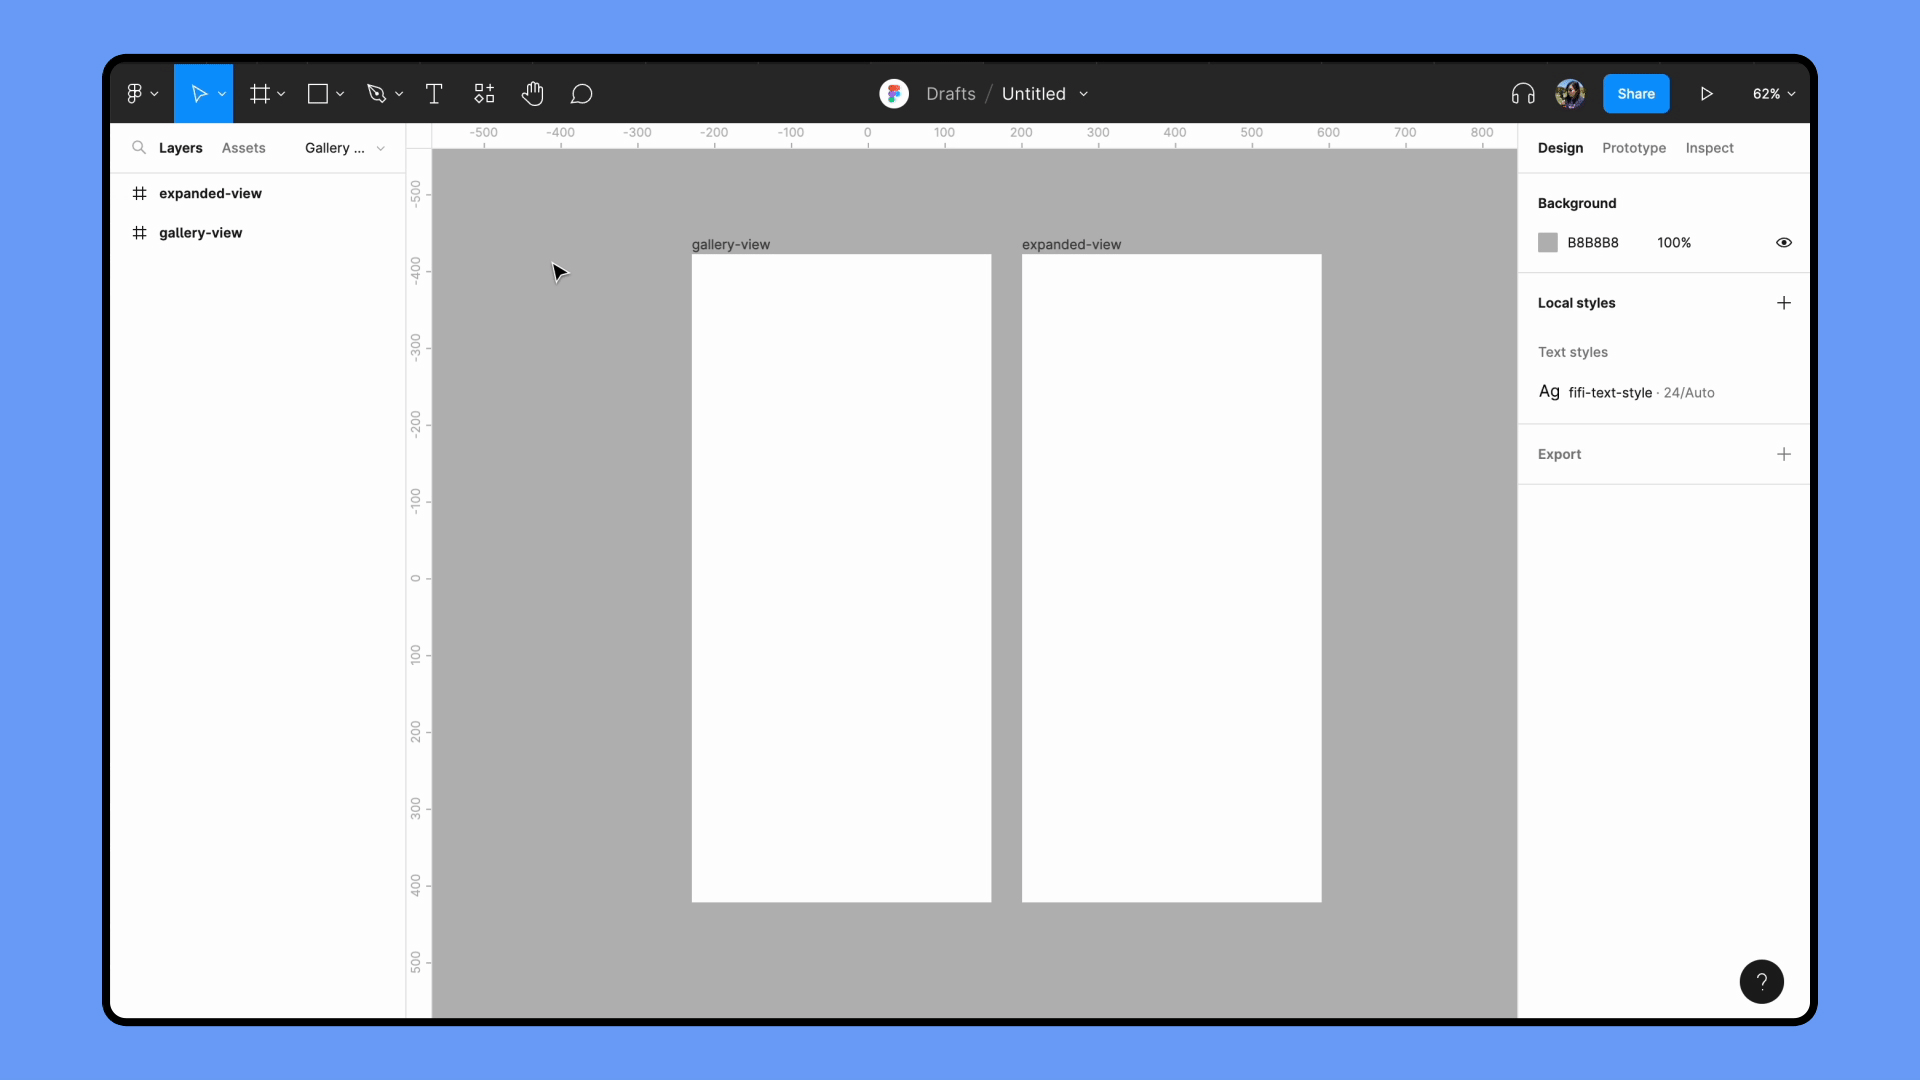 User selects Rectangle tool from toolbar, clicks and drags a rectangle on frame, then clicks and drags to center rectangle on frame.